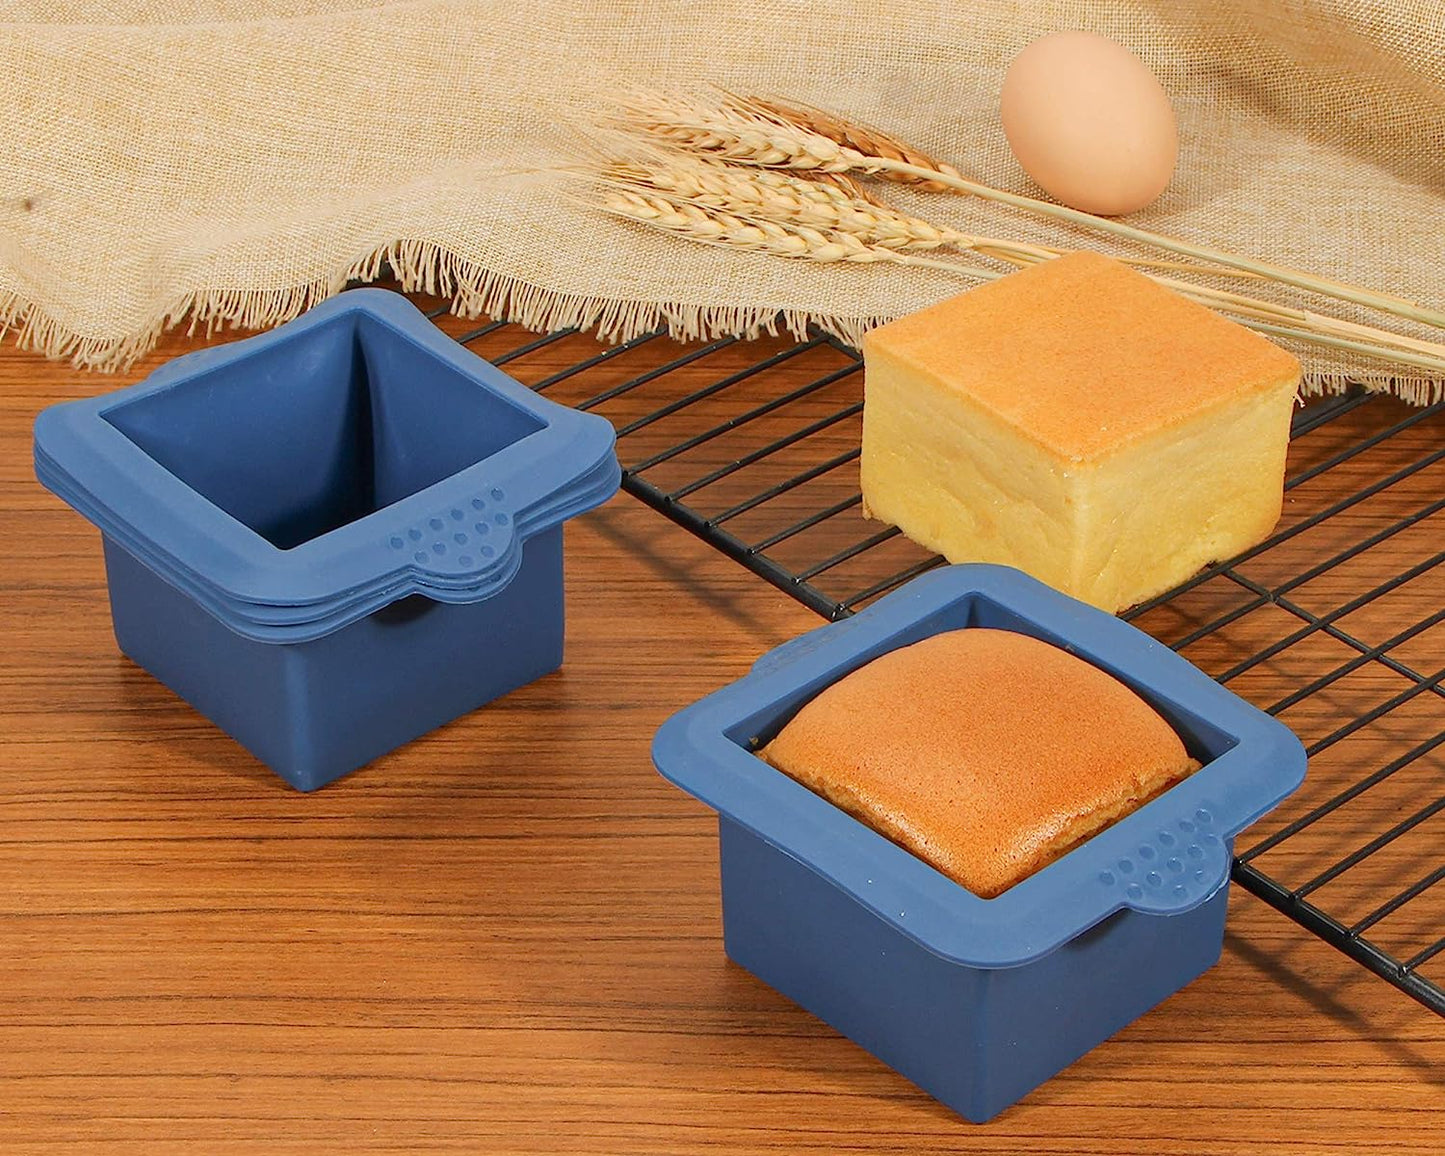 Webake Silicone Square Mini Cake Mold 3x3 Inch for Individual Portion  Baking Molds (Pack of 4)